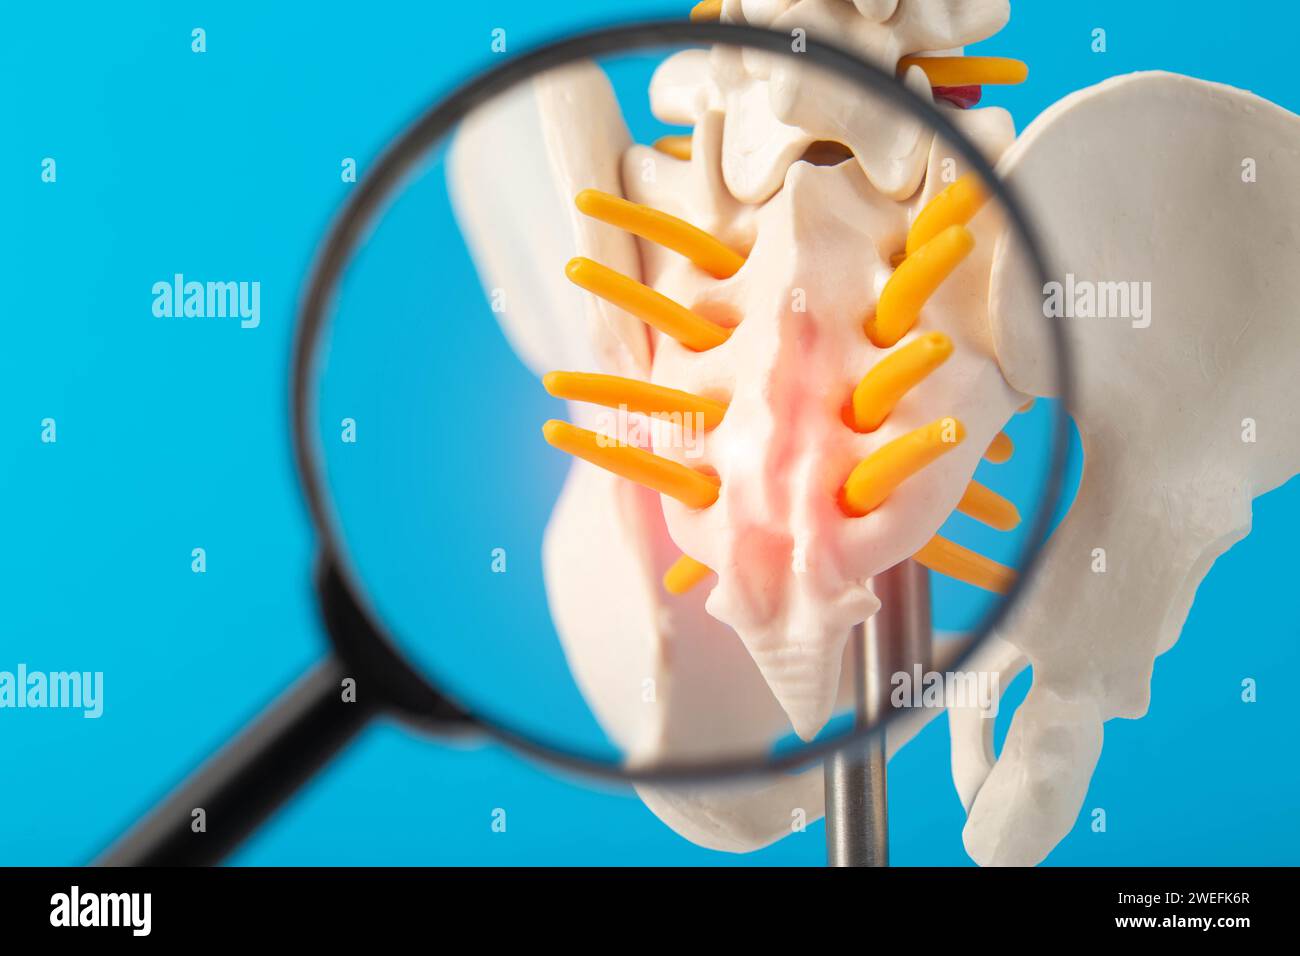 Coccyx and sacrum of the spine mockup on a blue background under a magnifying glass. Concept of degenerative spine diseases, injuries and back pain. L Stock Photo